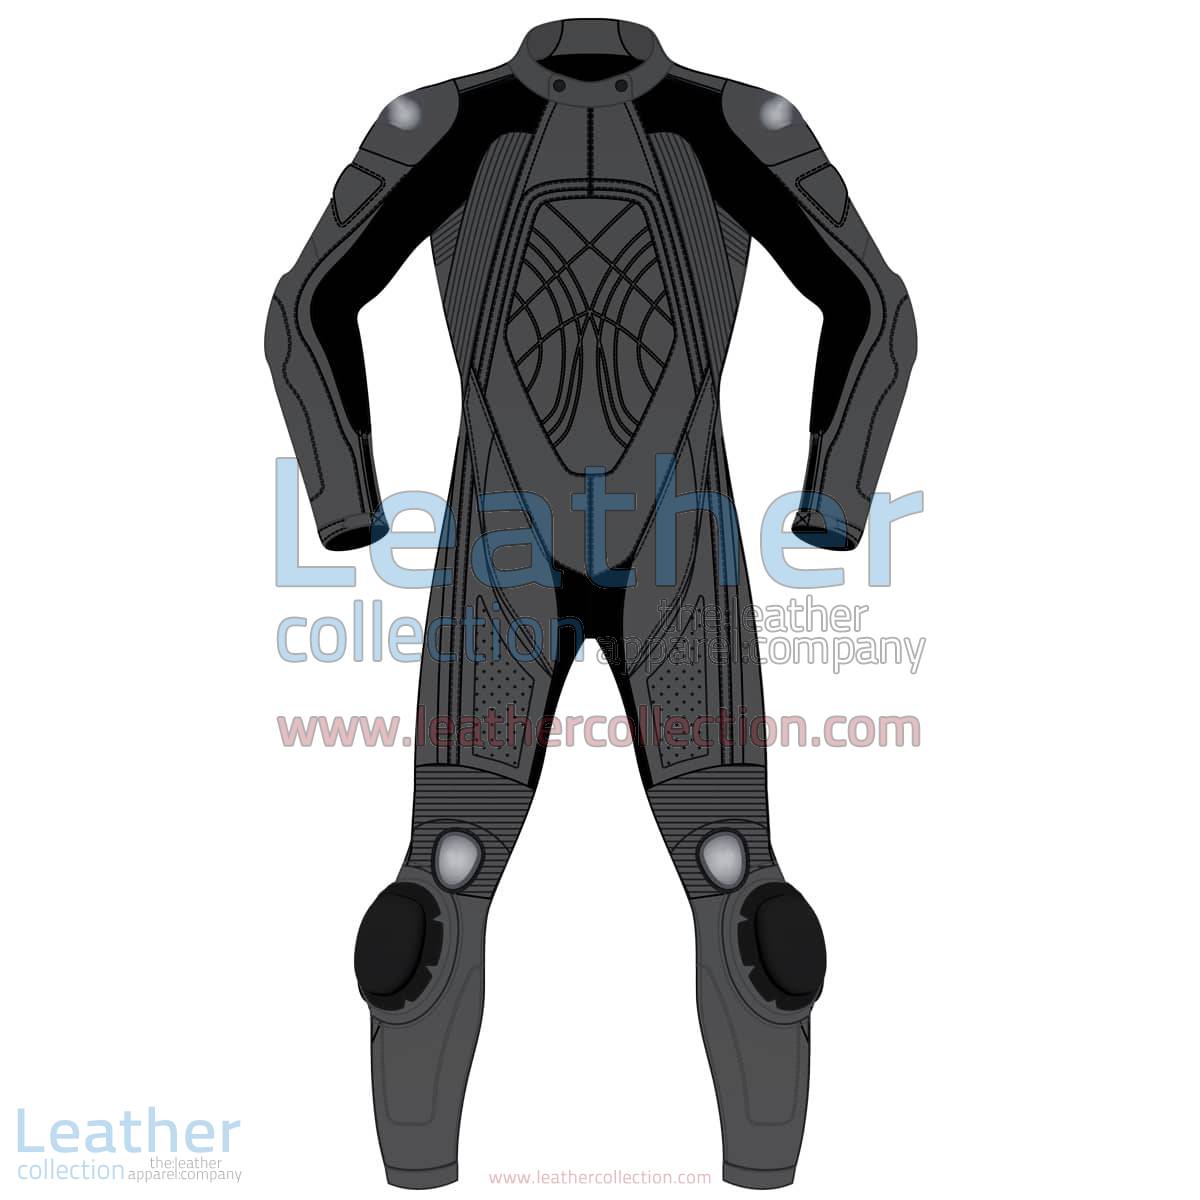 Uni Color One-Piece Motorbike Leather Suit for Men | Uni Color One-Piece motorcycle Men Leather Suit